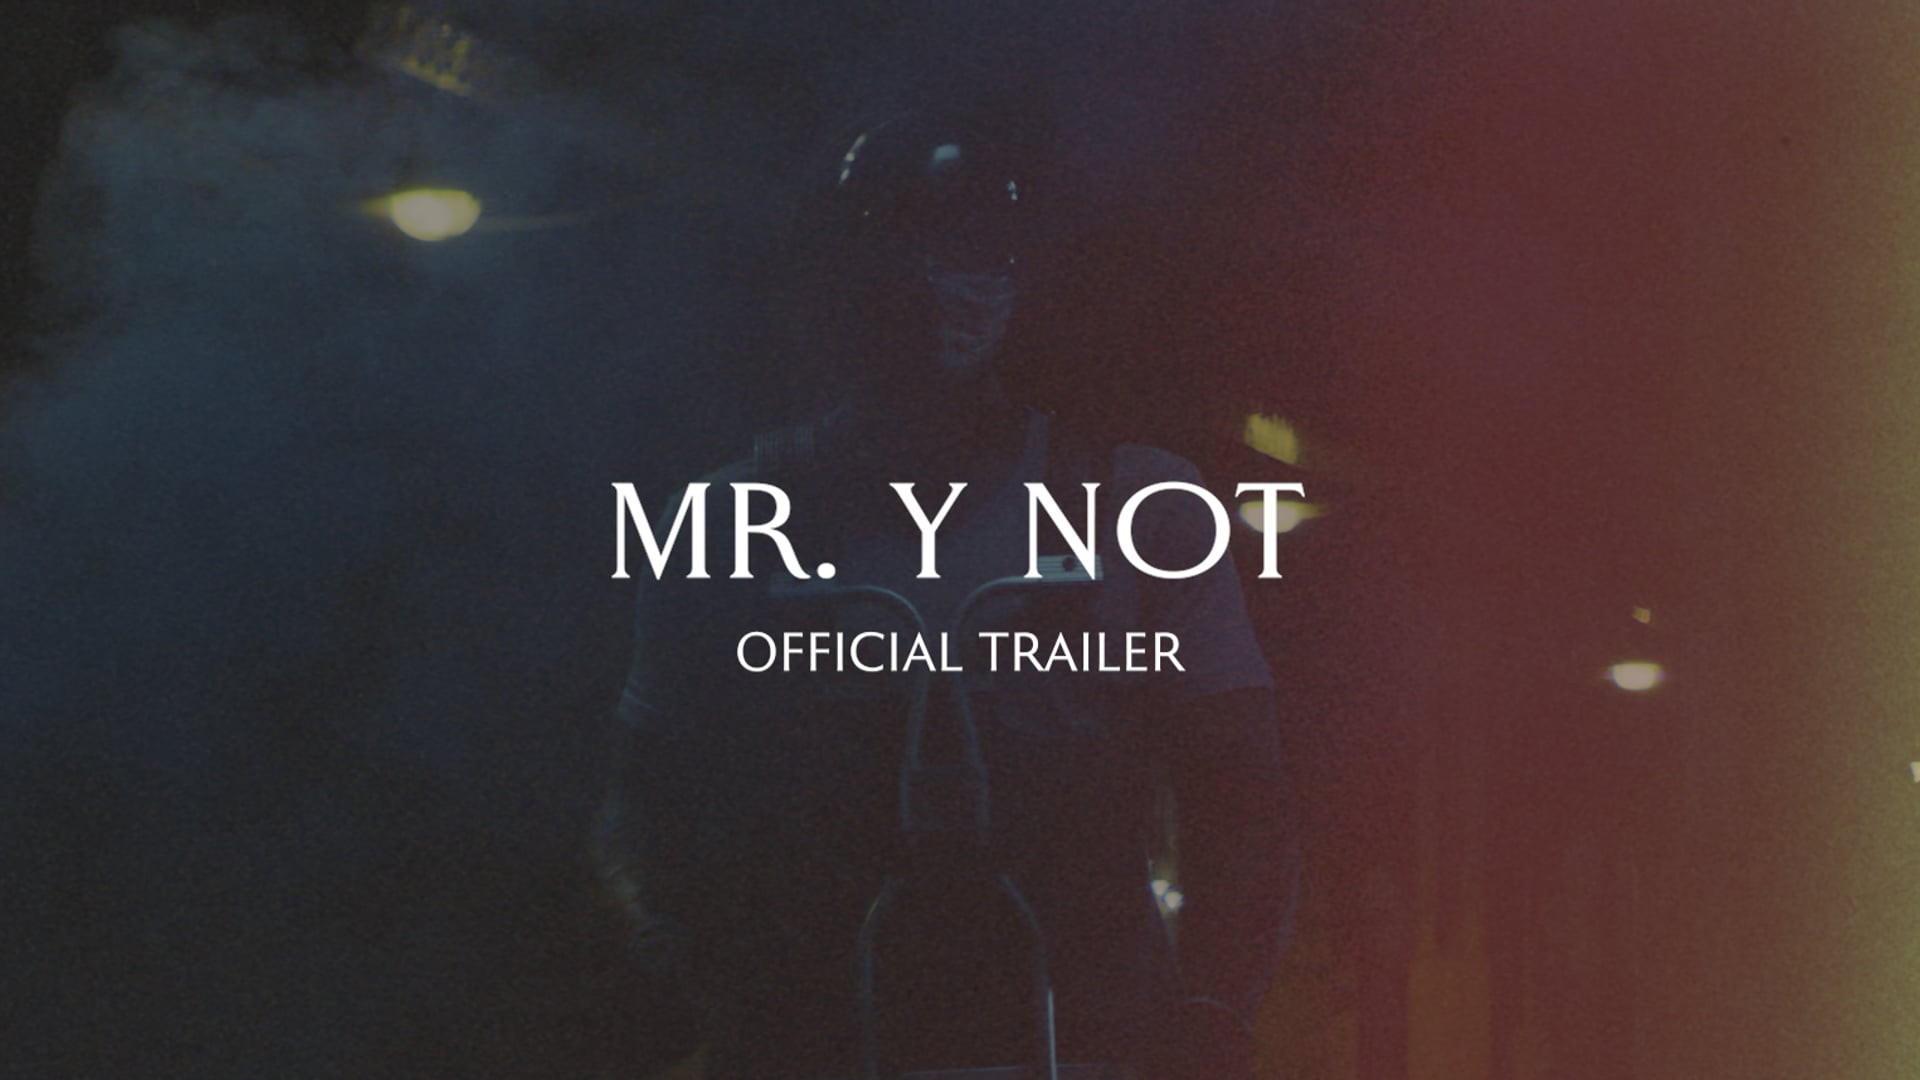 Mr. Y Not - Official Trailer